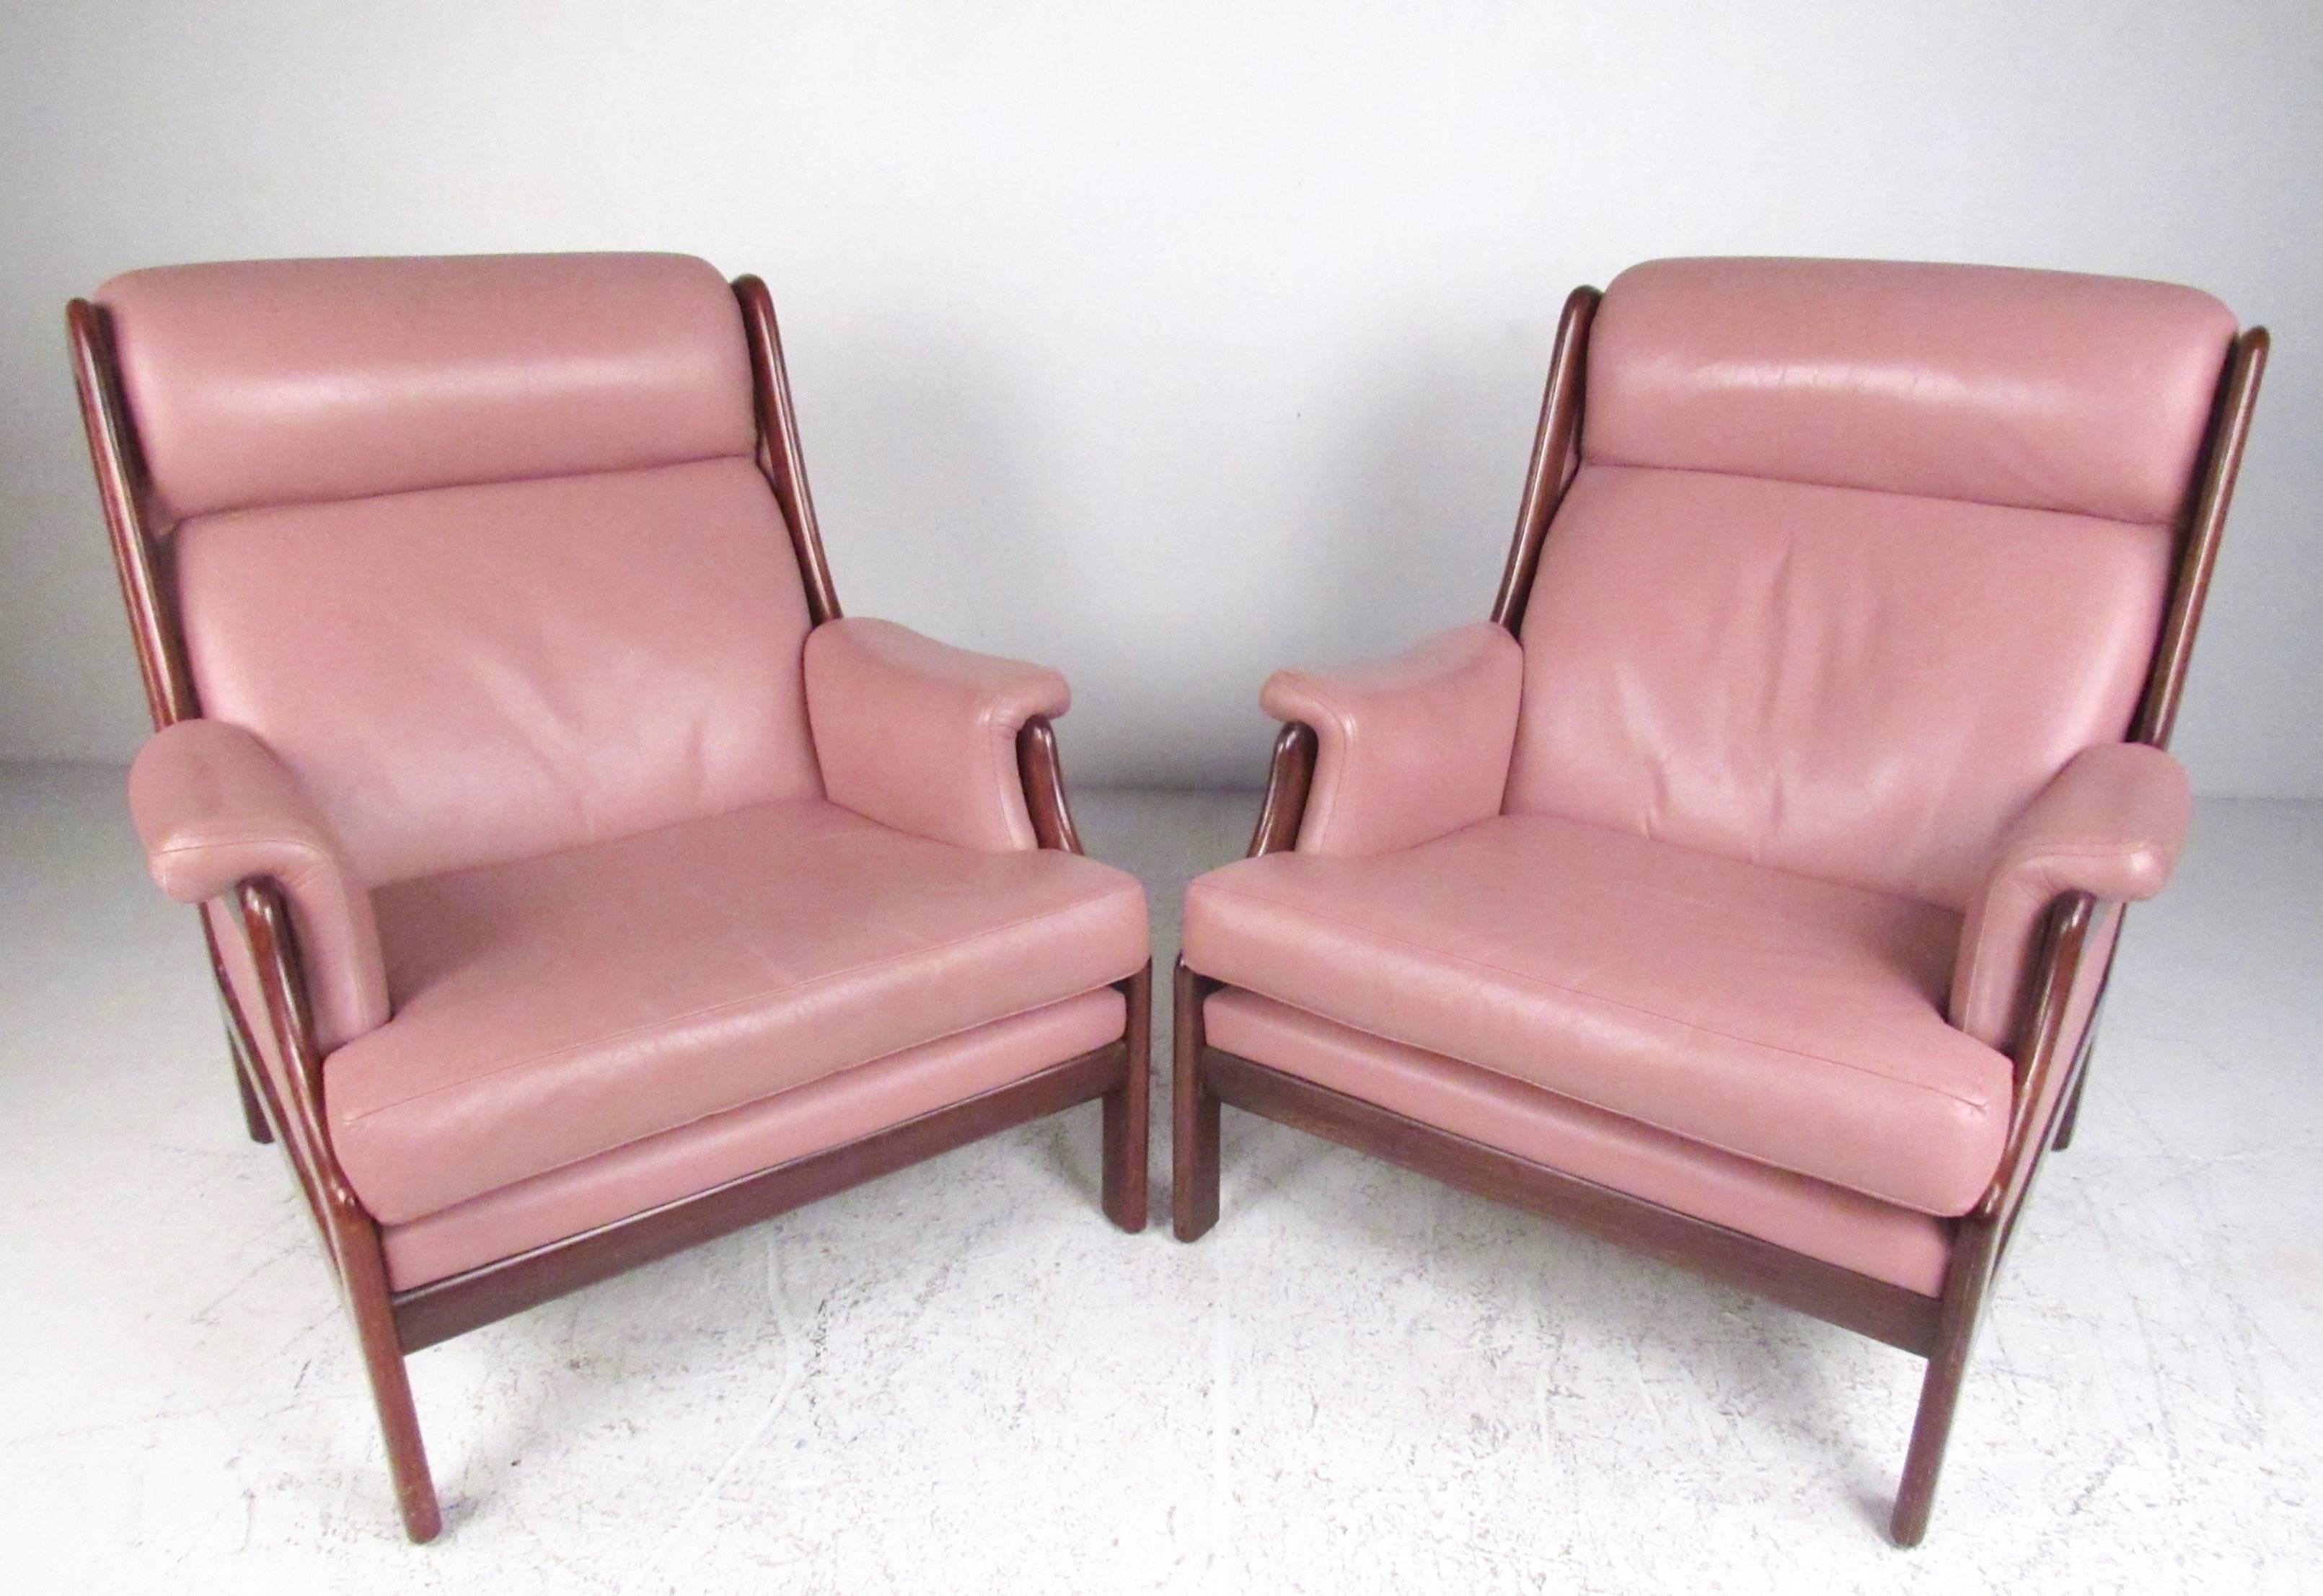 This stylish pair of Scandinavian Modern lounge chairs boast leather high back seats, sturdy sculptural teak frames and timeless modern comfort. Well padded seats and armrests make these a comfortable Mid-Century lounge chair for any interior.